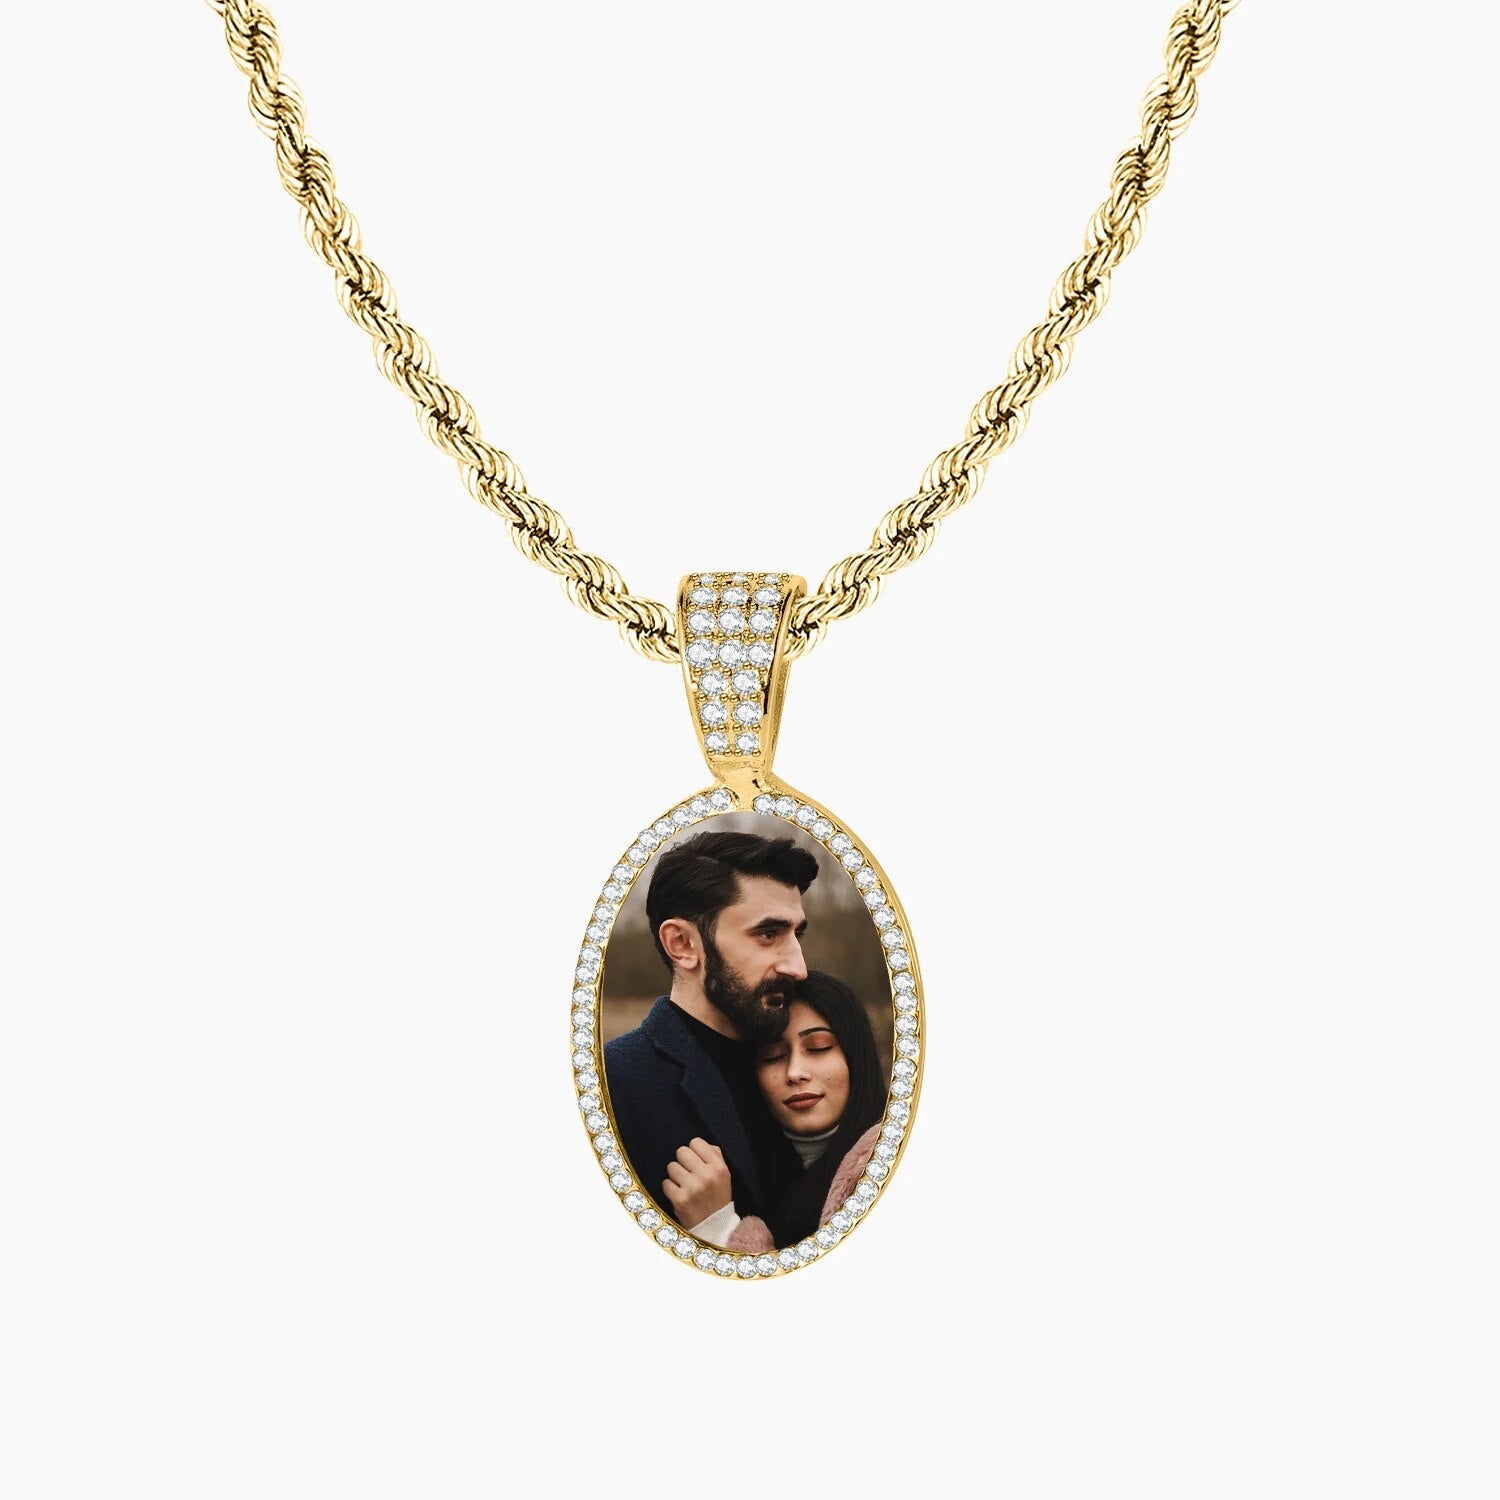 Personalized Photo Memory Picture Necklace